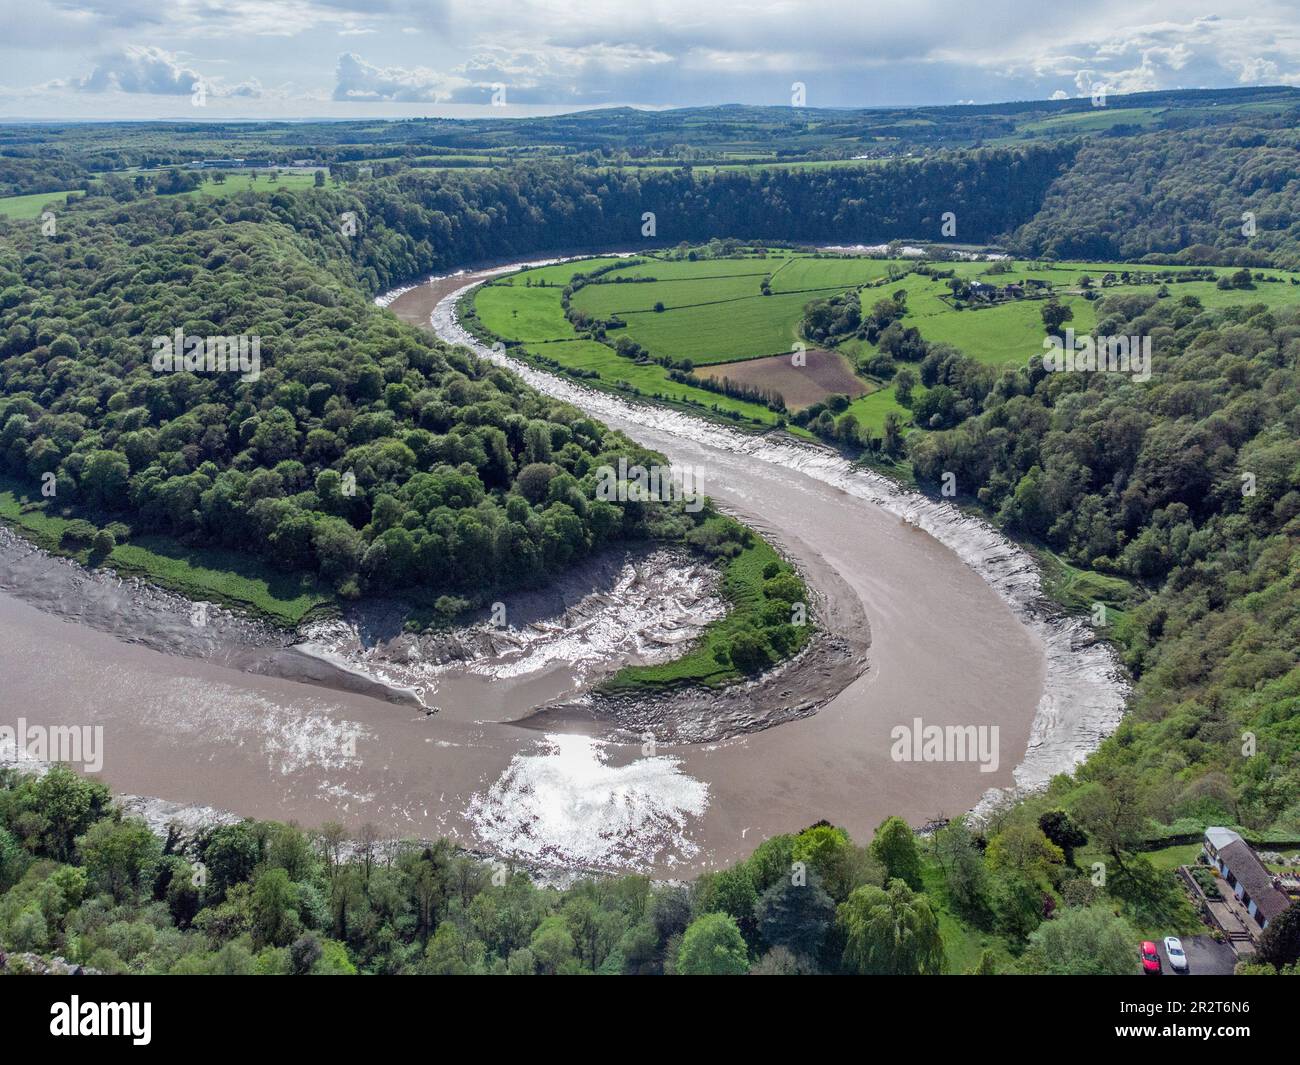 River Wye, one of the UKs most polluted rivers at woodcroft,  Wintours Leap near Chepstow Stock Photo